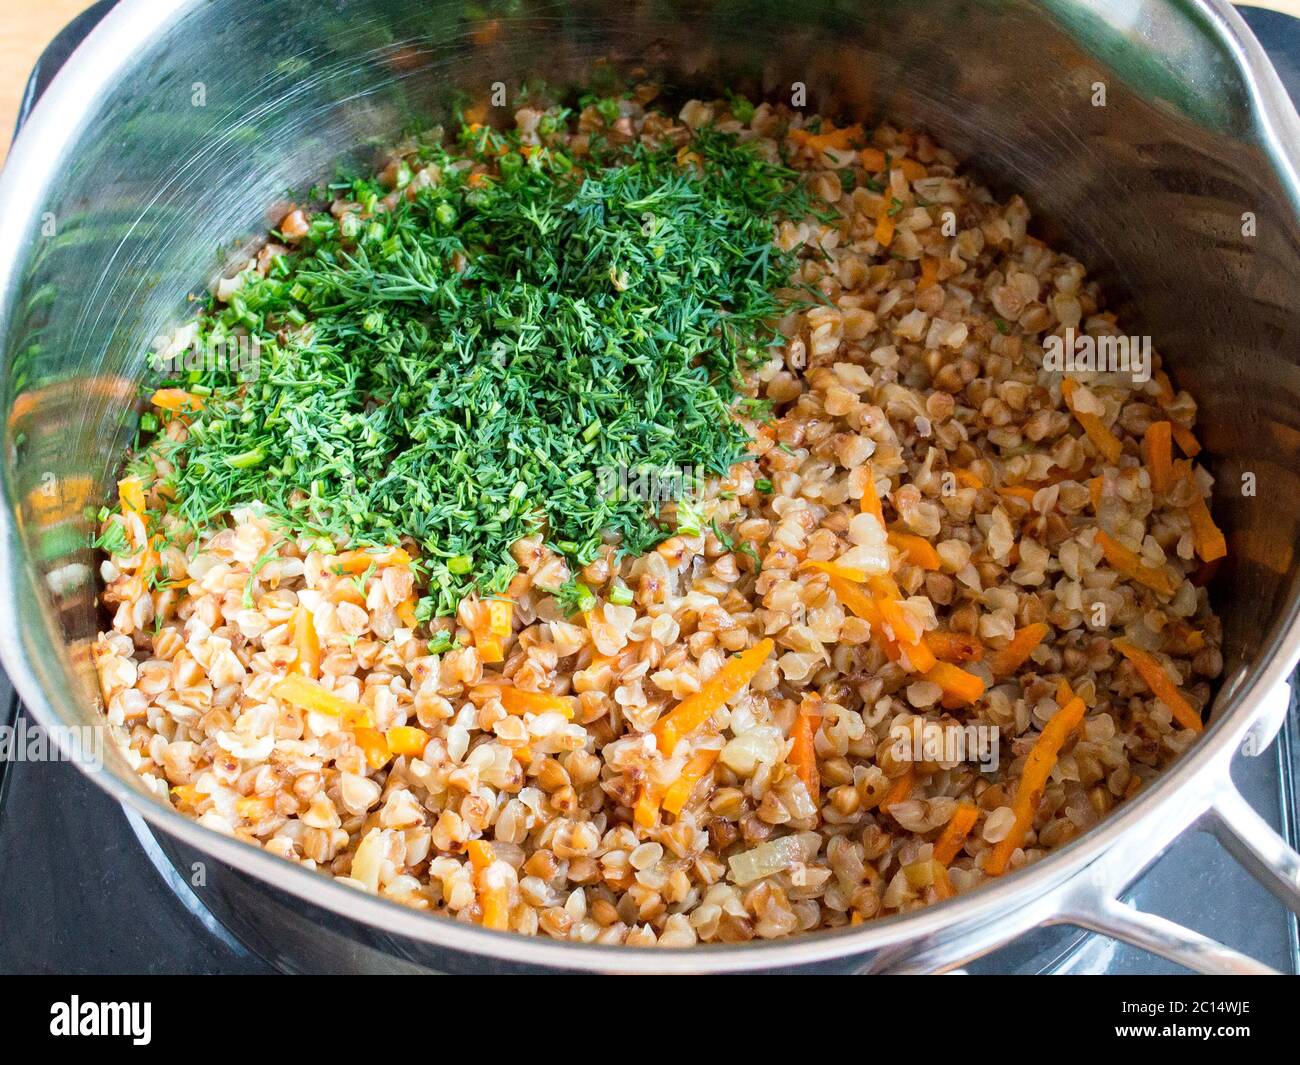 Add finely chopped greens to buckwheat with vegetables. Cook porridge with vegetables. Stock Photo